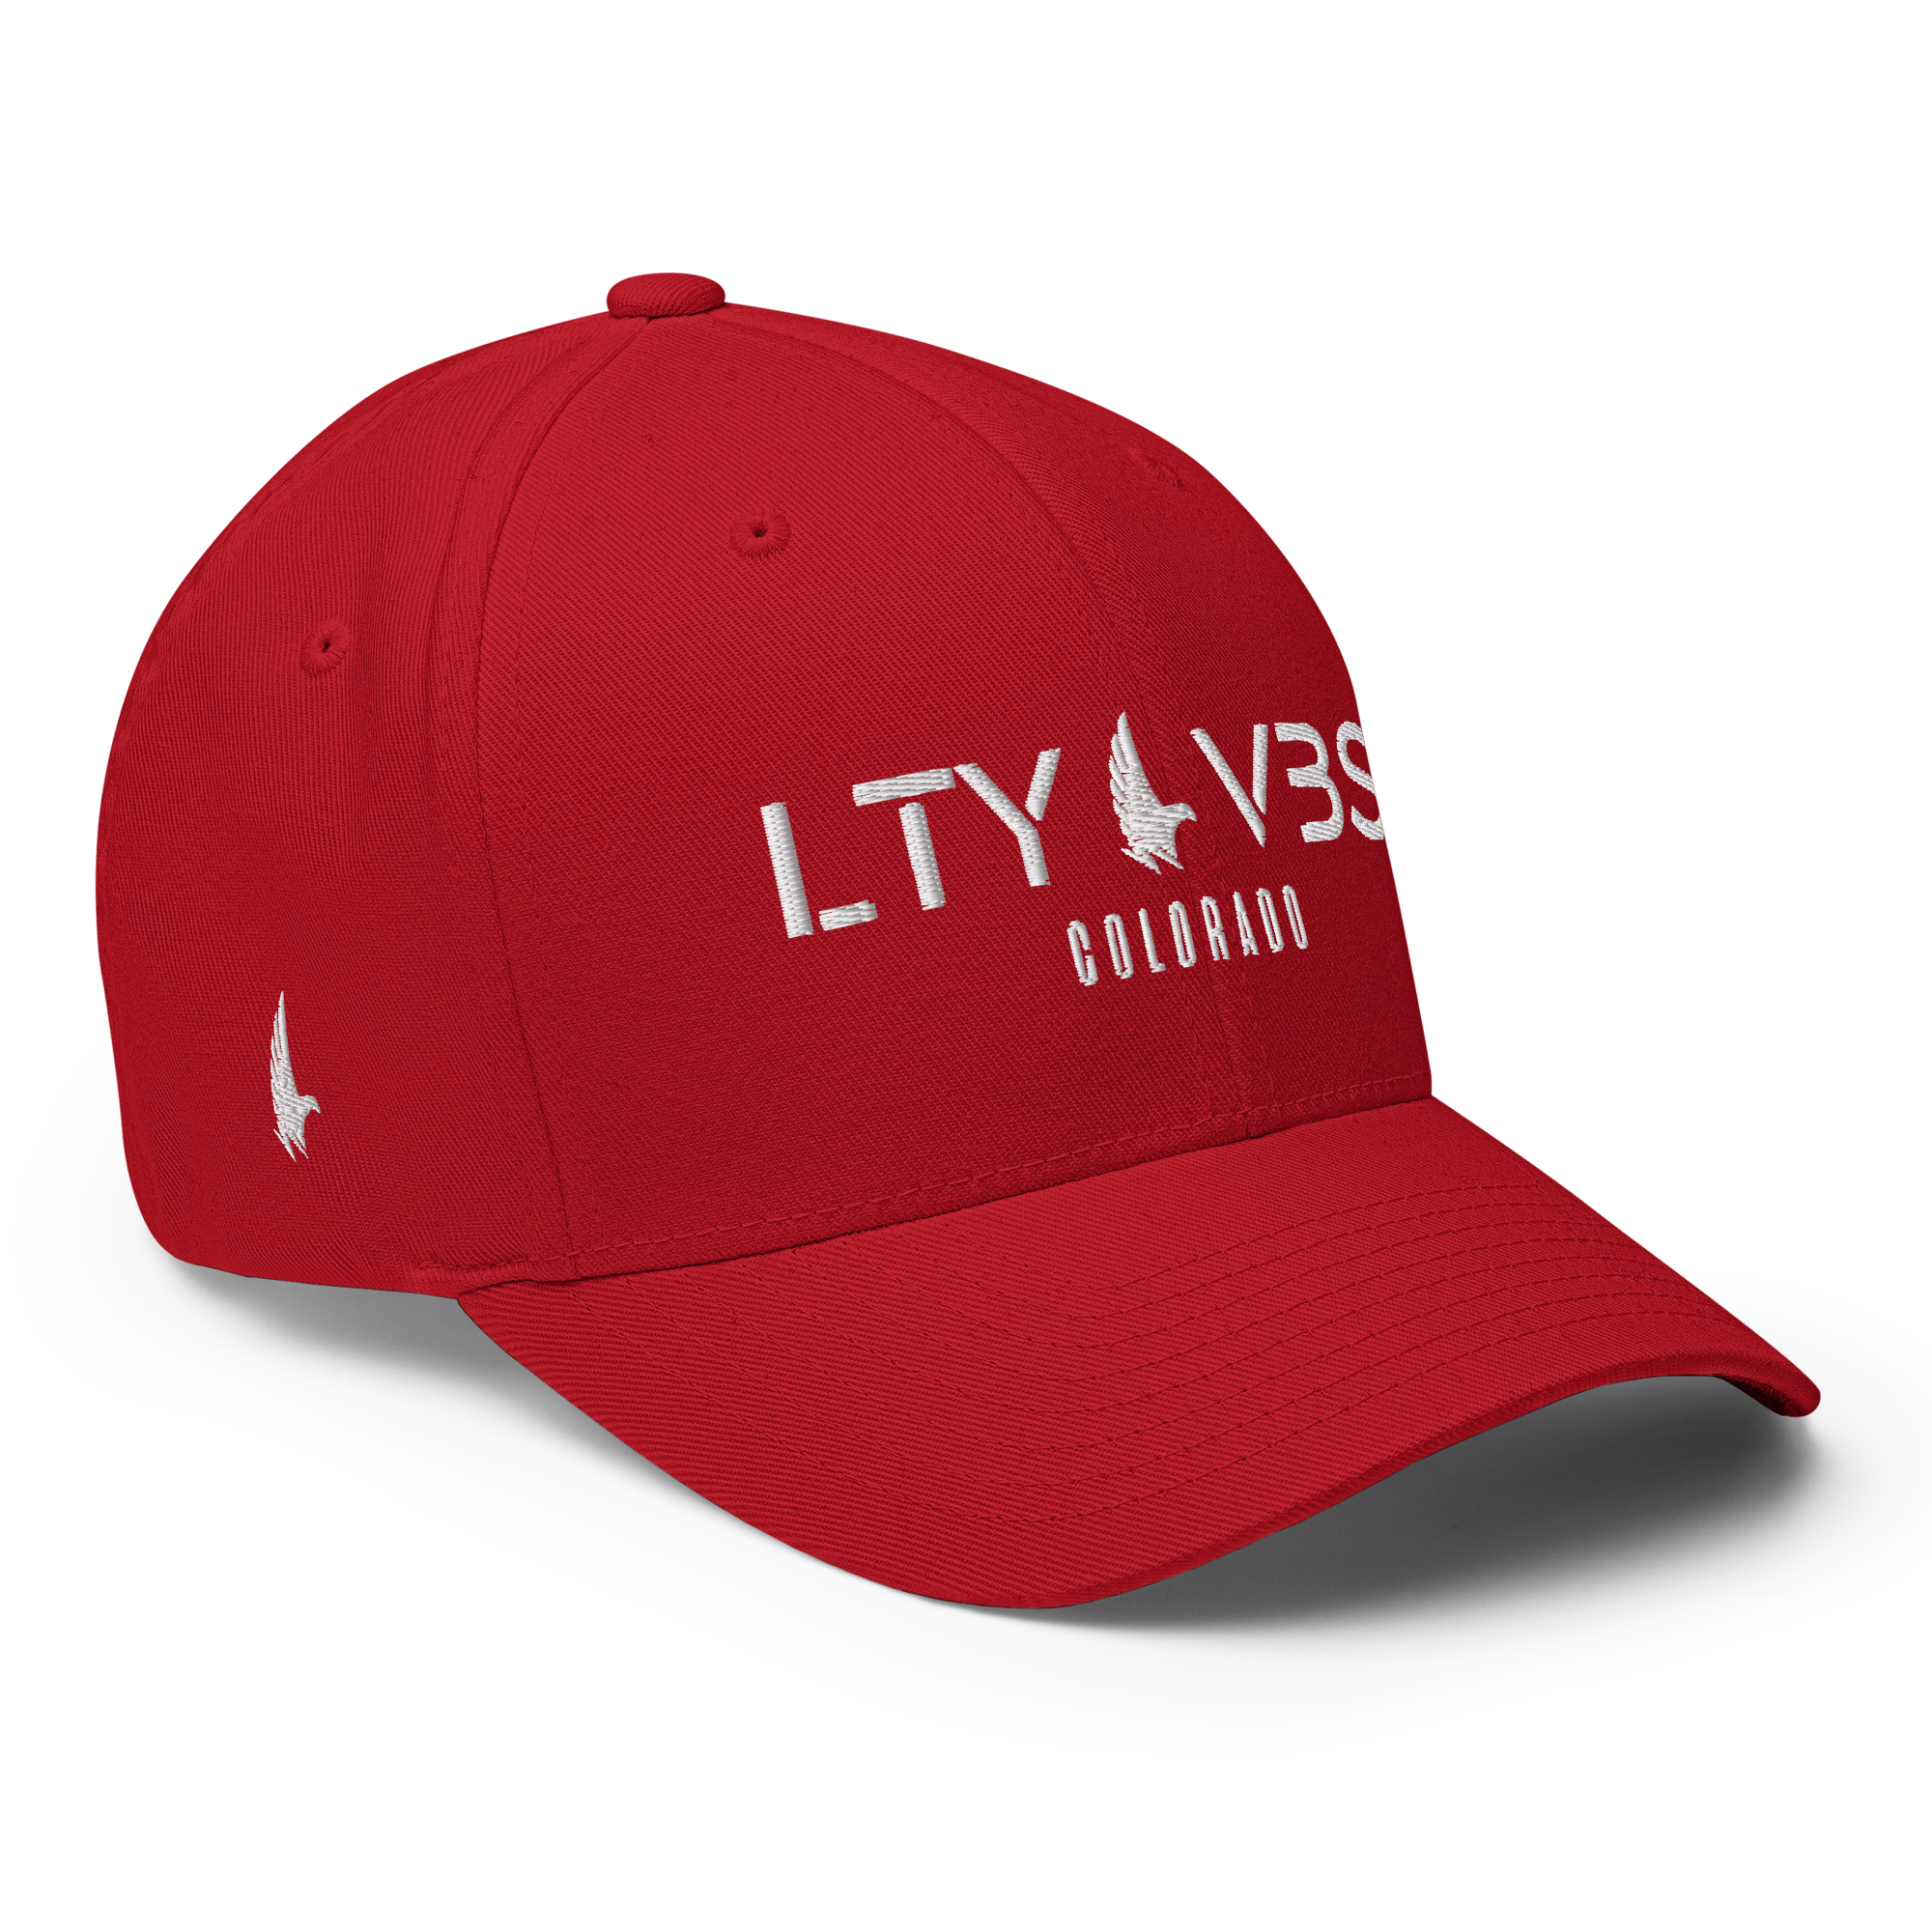 Loyalty Era Colorado Fitted Hat - Red / White Fitted - Loyalty Vibes